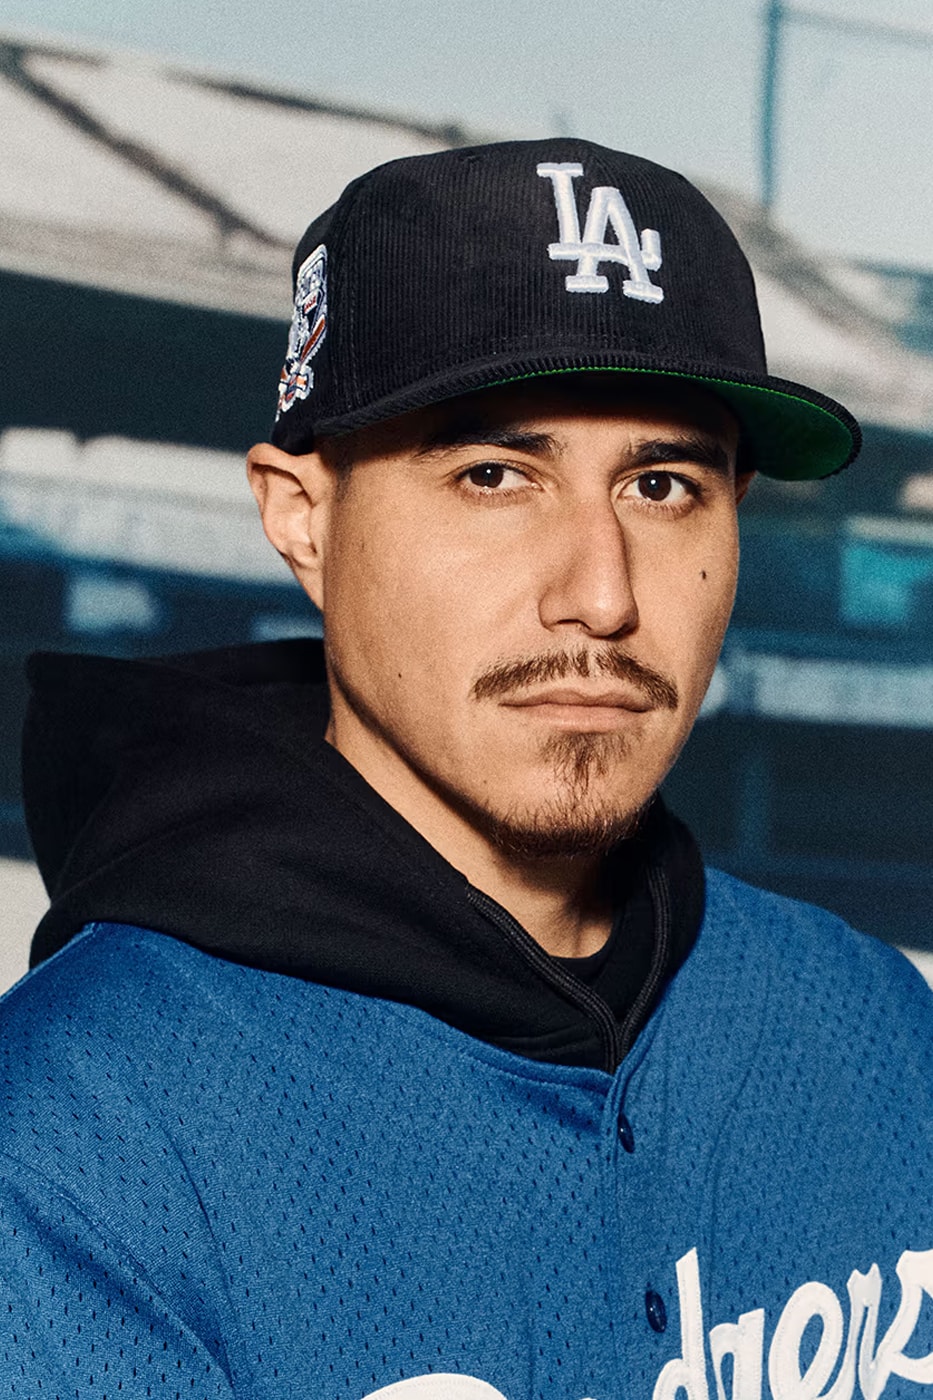 UNDEFEATED x Los Angeles Dodgers x New Era 59FIFTY 联名系列帽款發佈